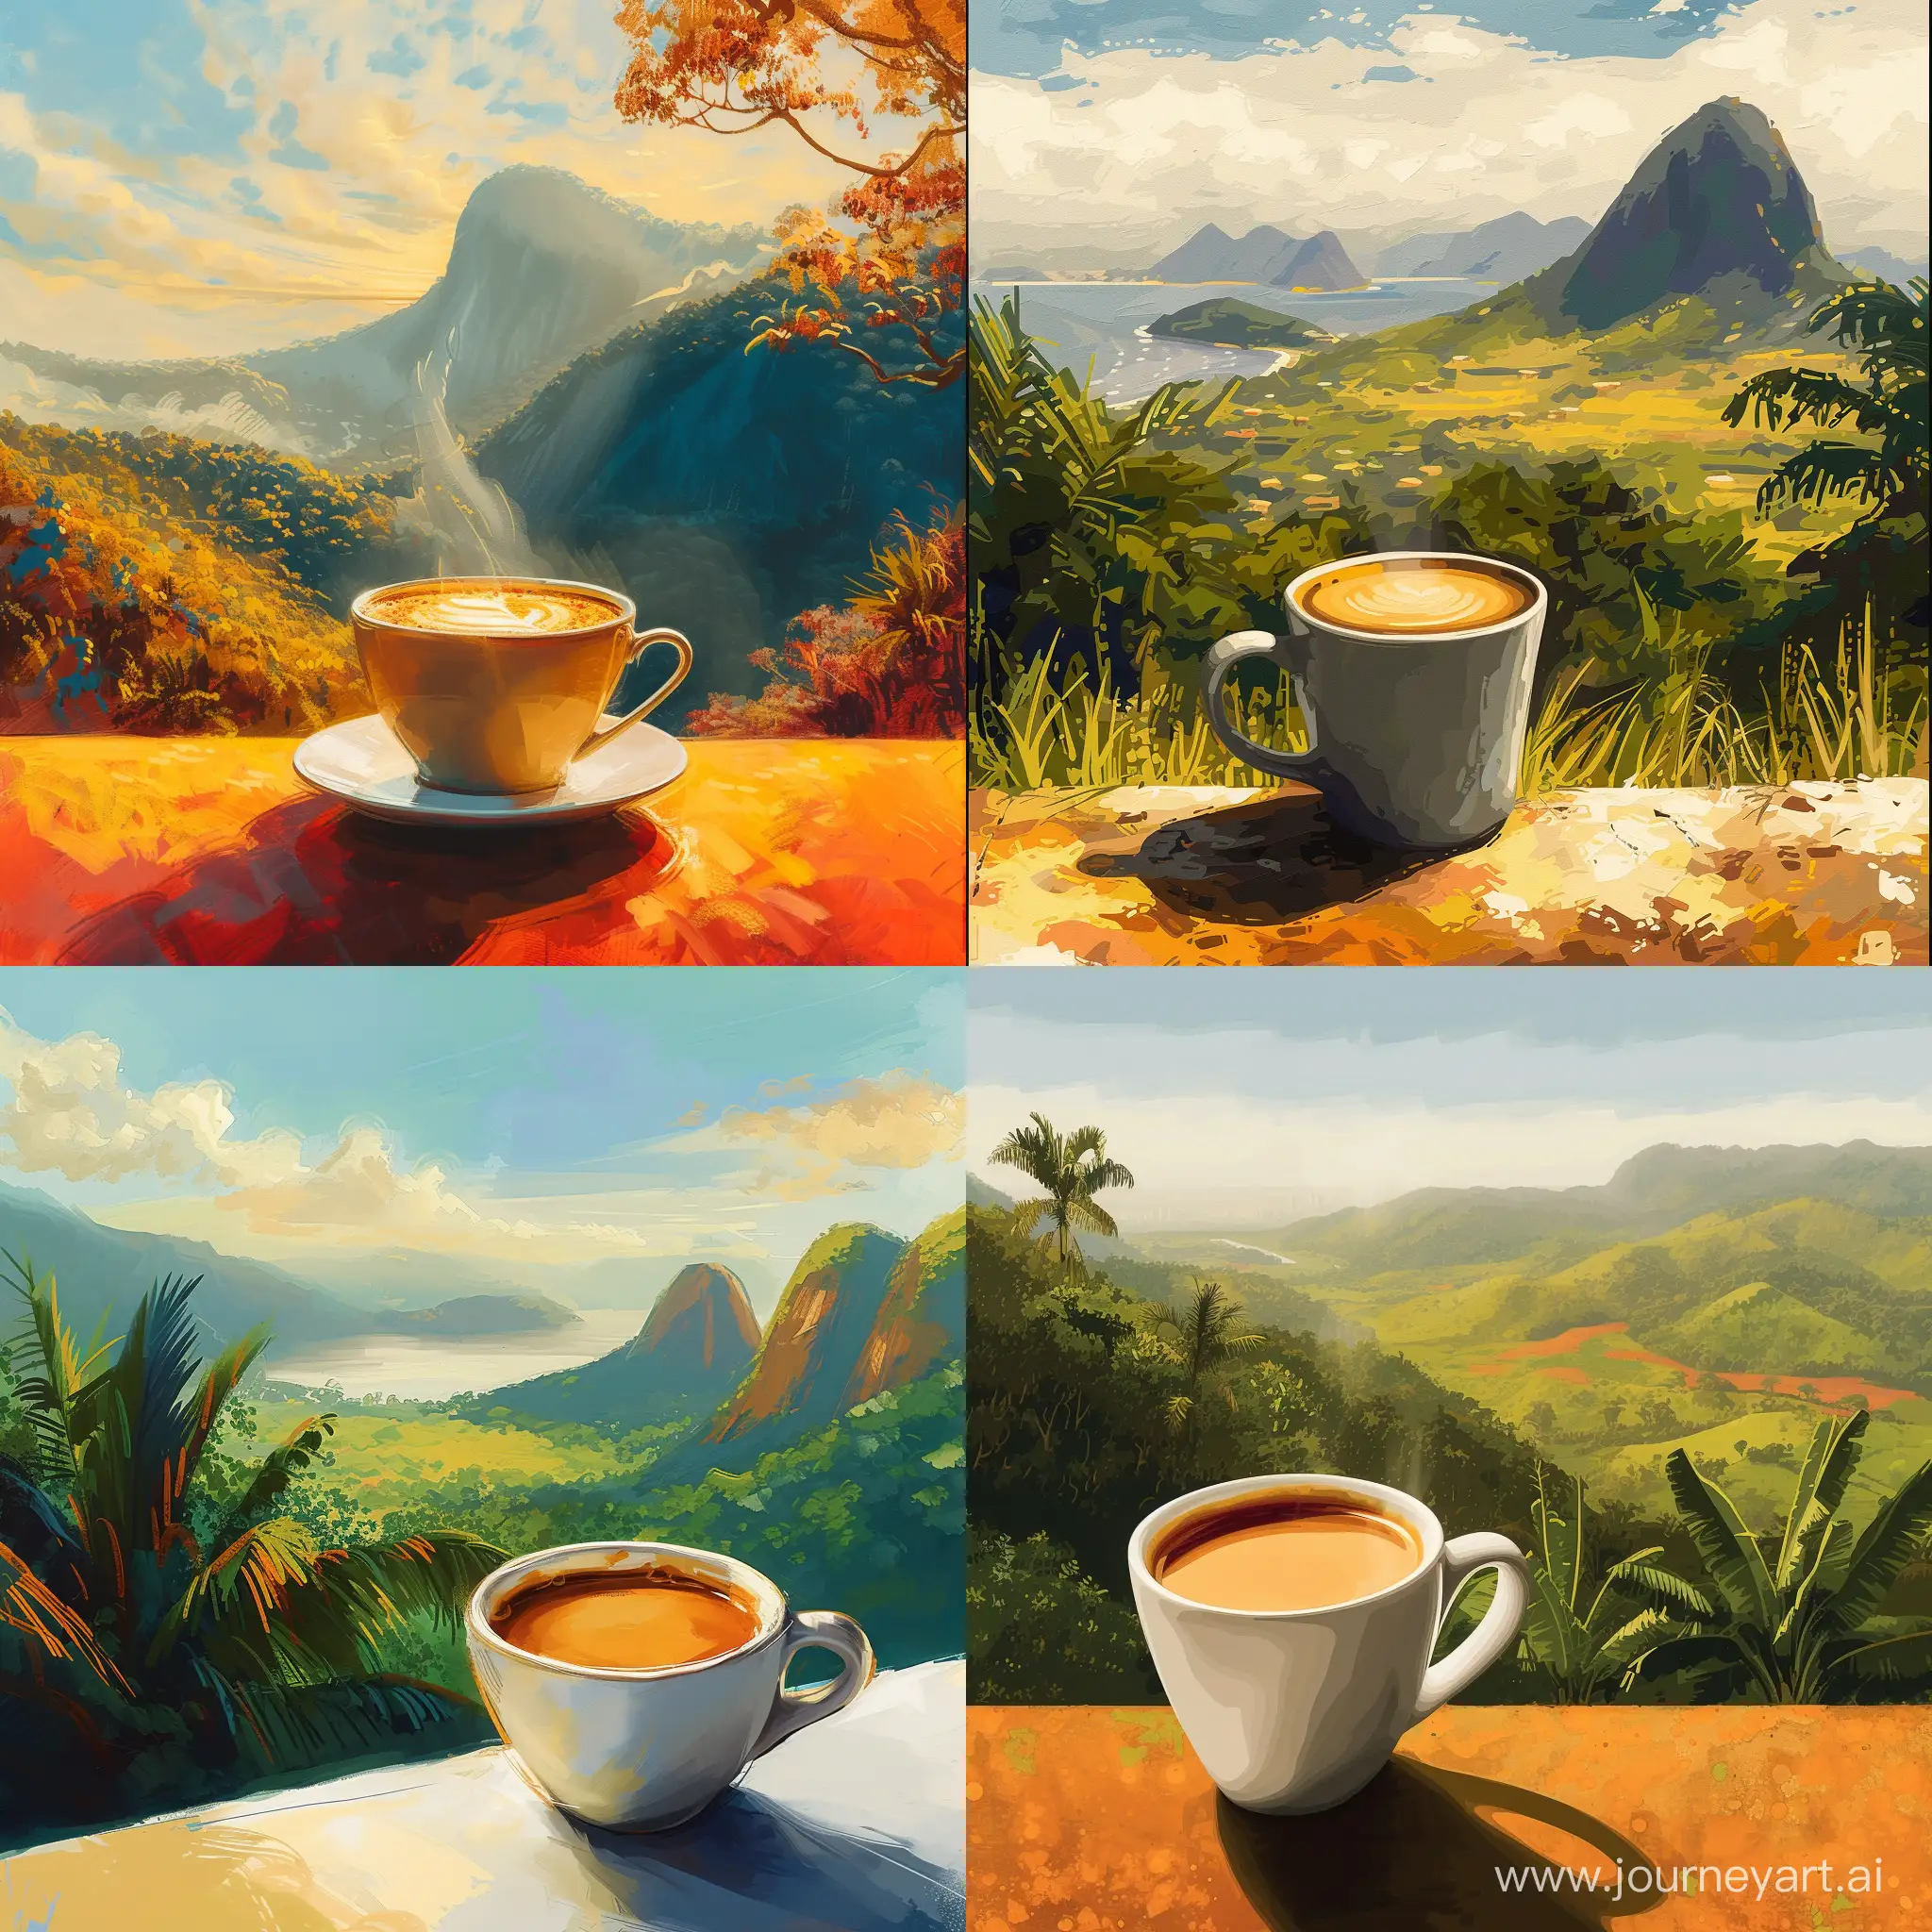 Tranquil-Brazilian-Coffee-Break-Scenic-Landscape-and-Steaming-Cup